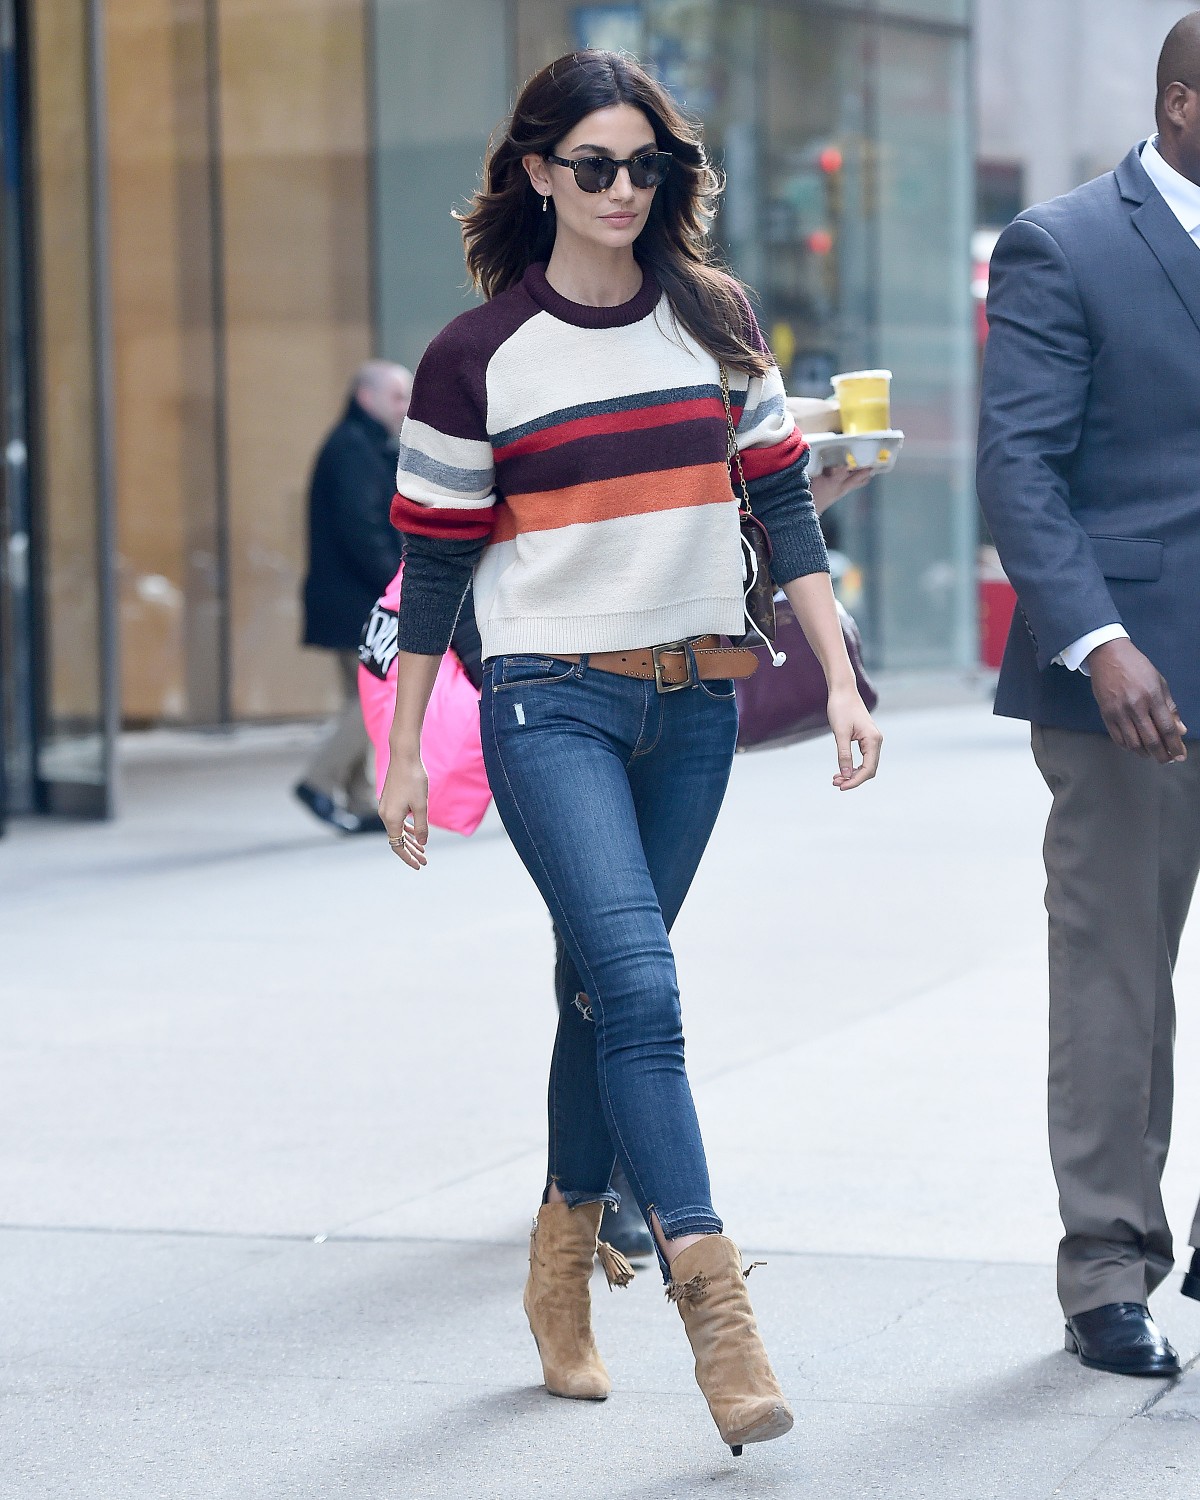 Lily Aldridge seen wearing a striped sweater for the Victoria Secret fittings in New York City